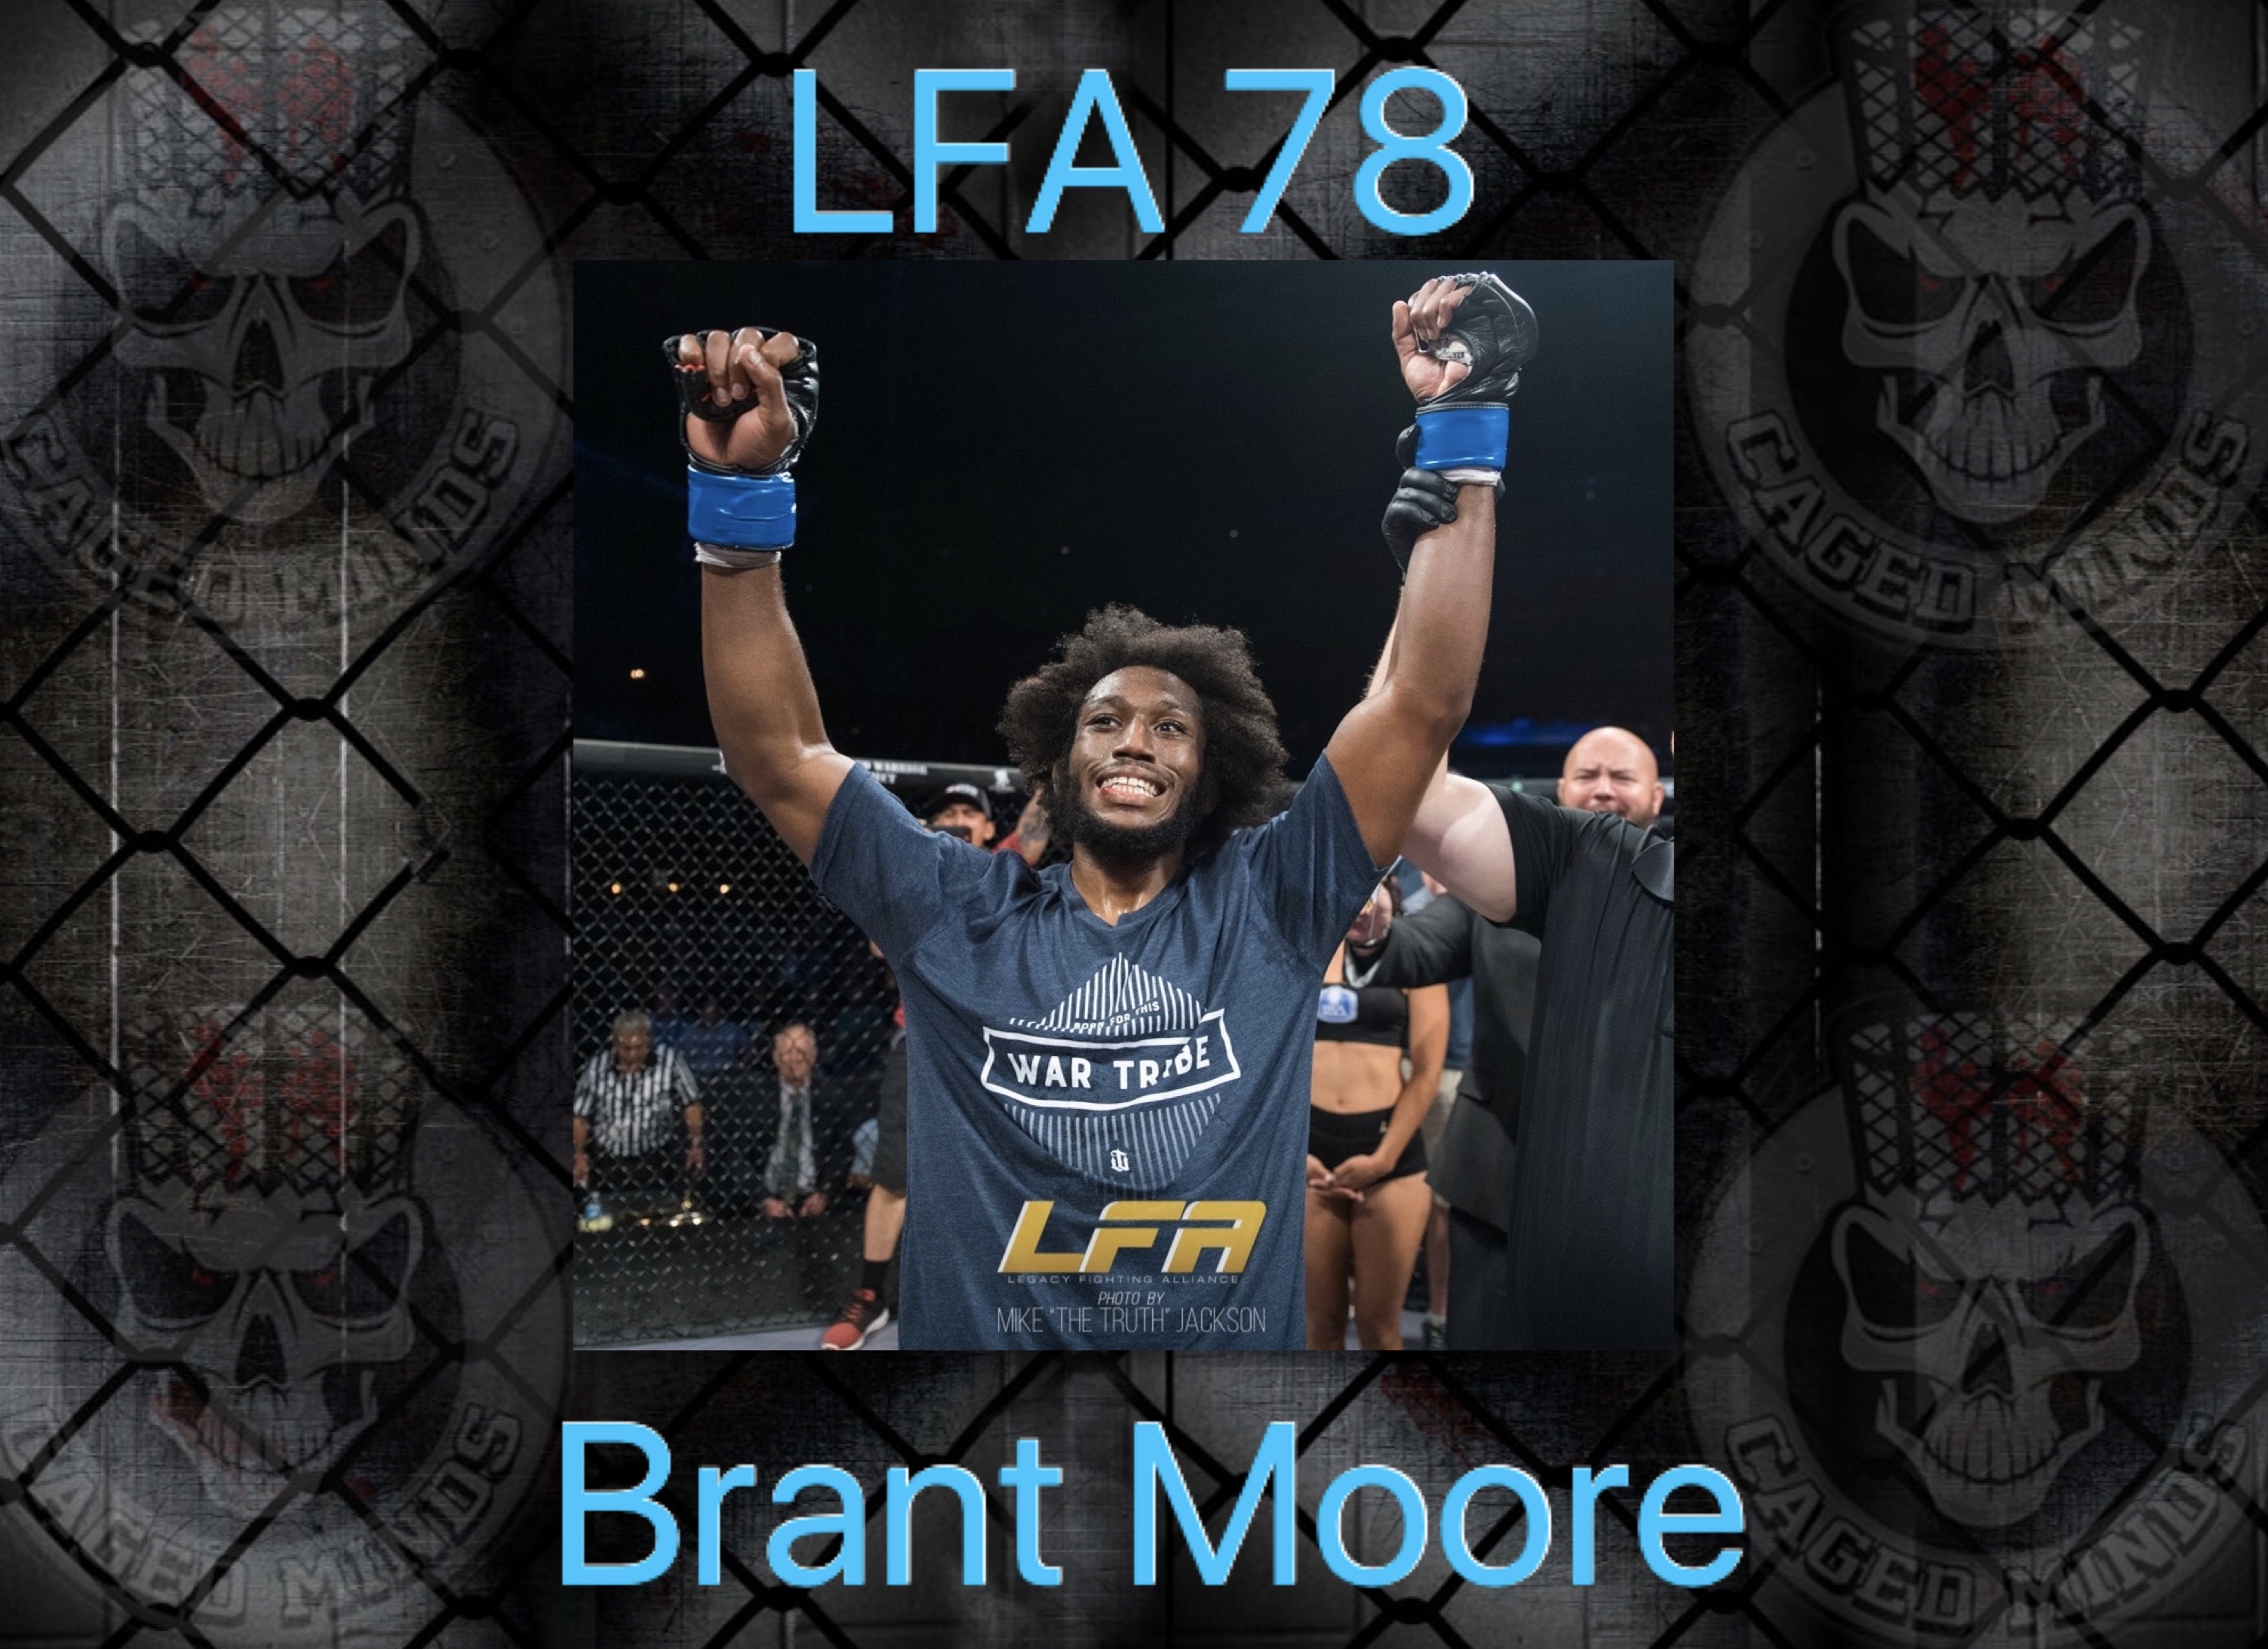 Brant Moore the goal is to become the greatest fighter in the world -